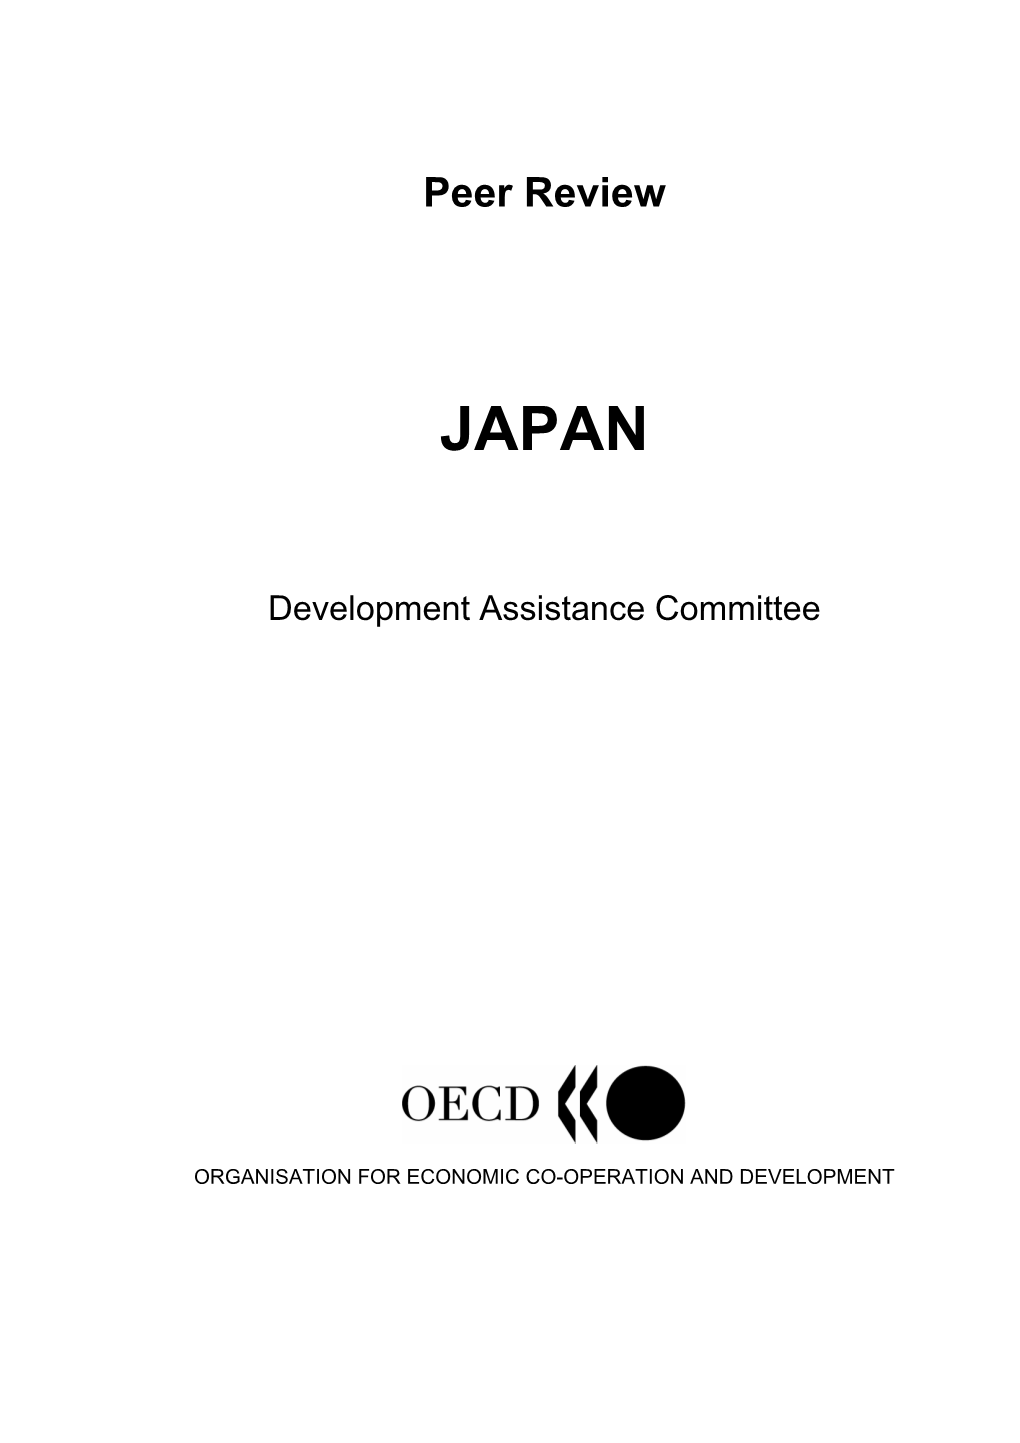 From the OECD DAC Peer Review of Japan